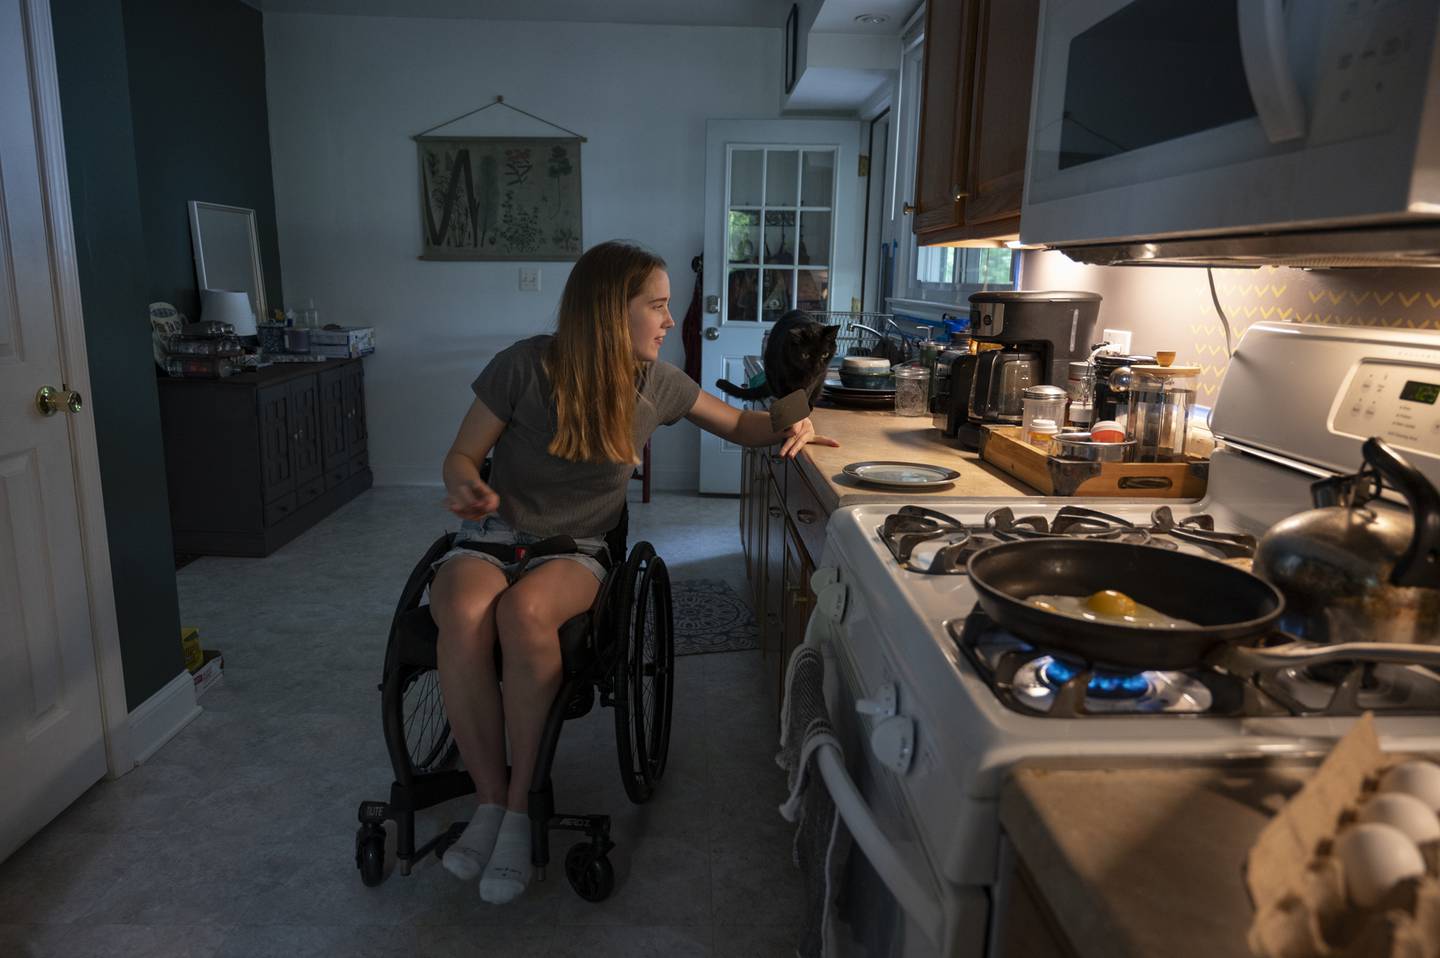 Anneliese Williams, 22, makes herself breakfast. Her decreased mobility doesn't stop her from living her daily life.